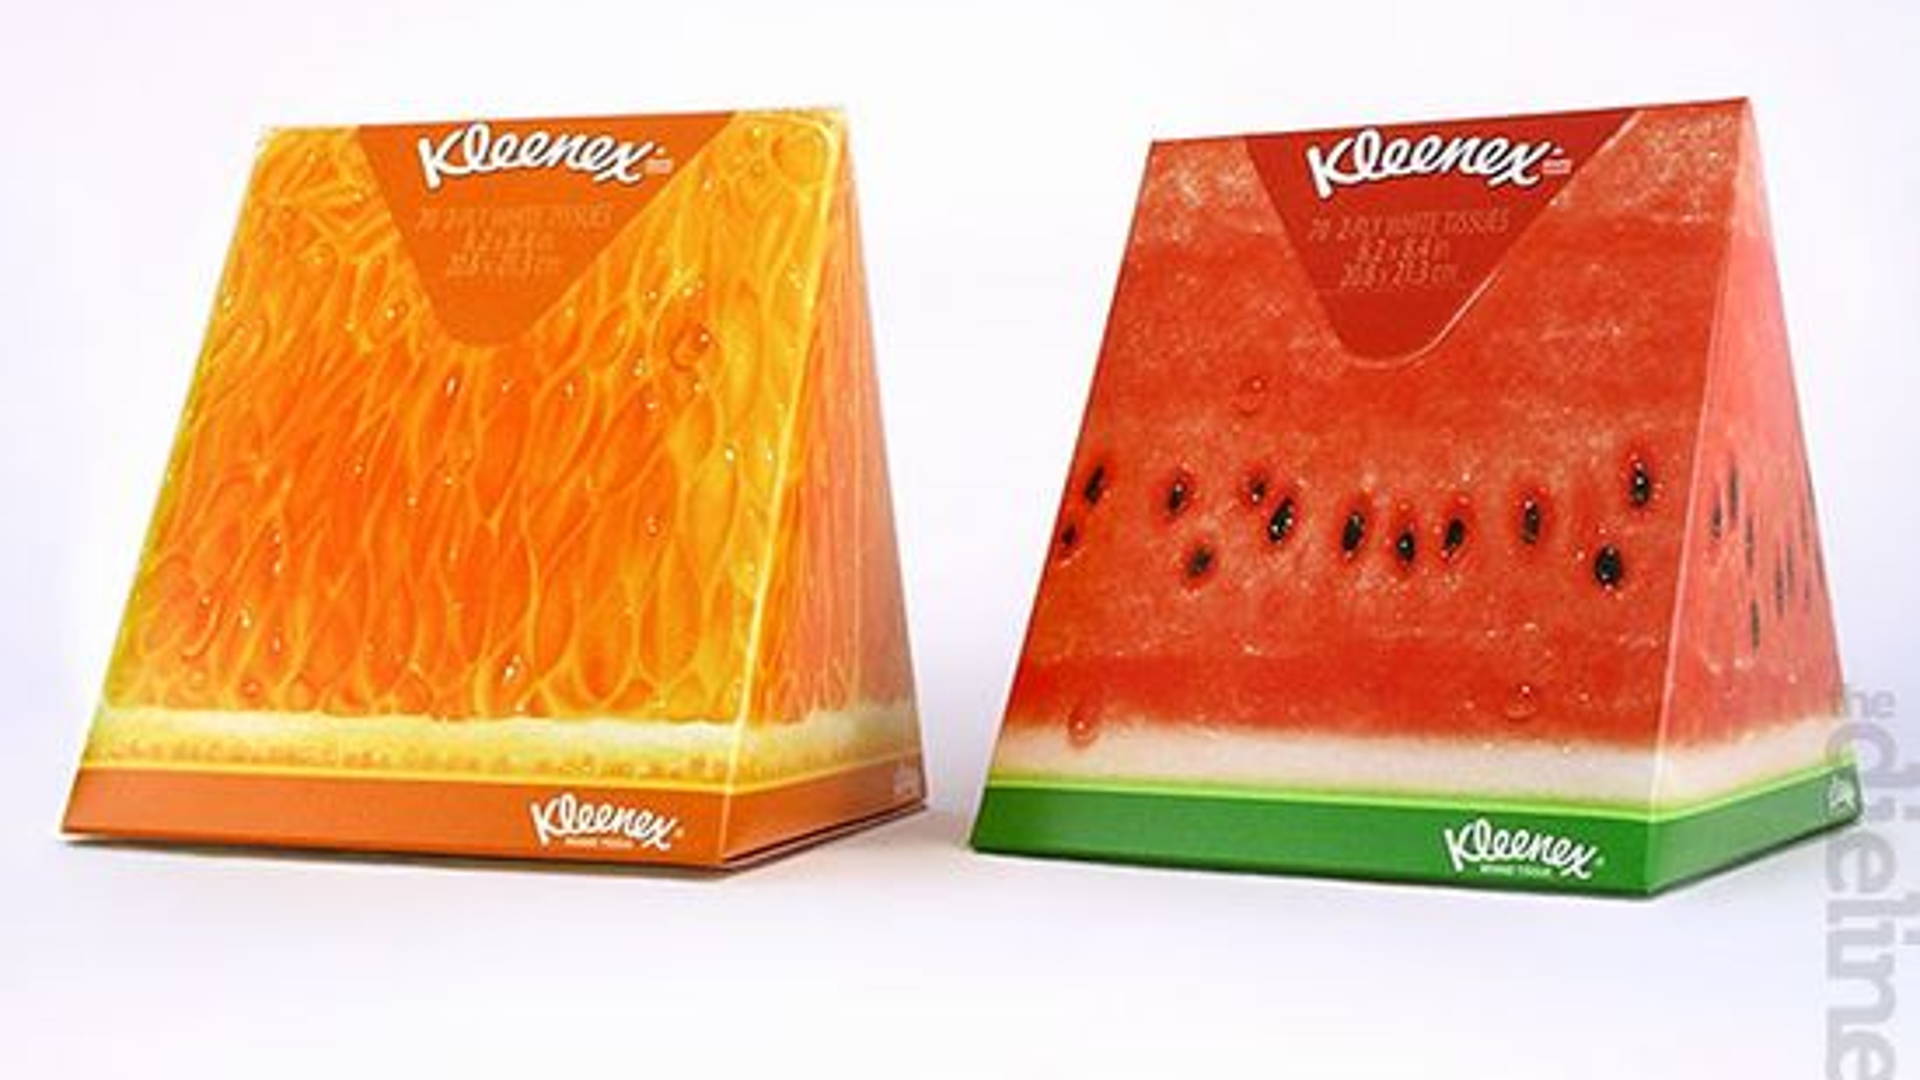 Featured image for "Perfect Slice of Summer" tissue boxes